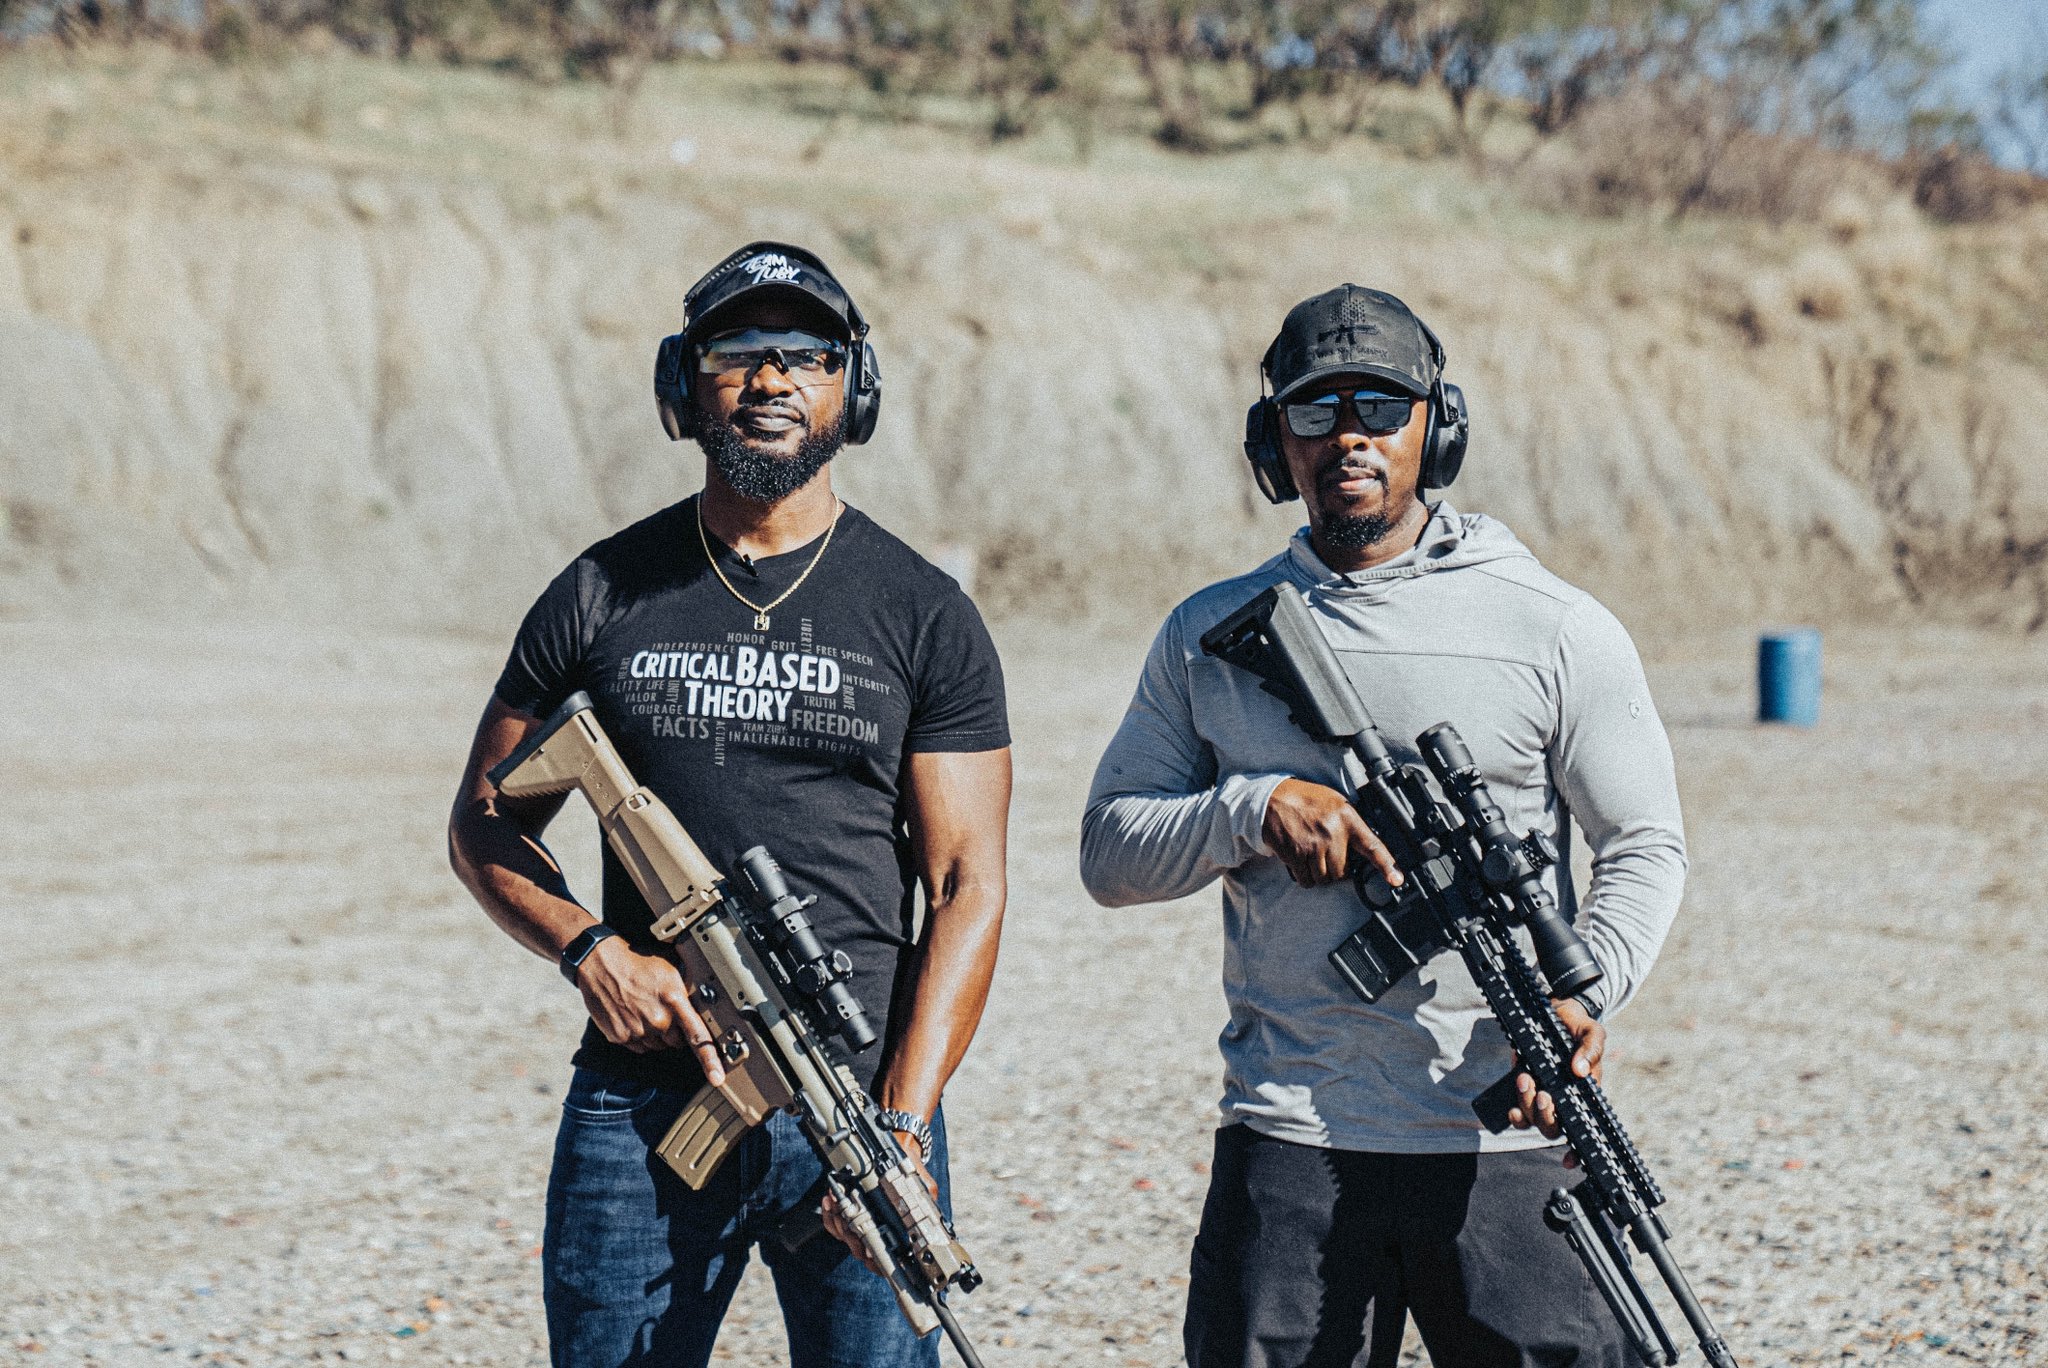 Colion Noir on X: Had a blast shooting with @ZubyMusic today